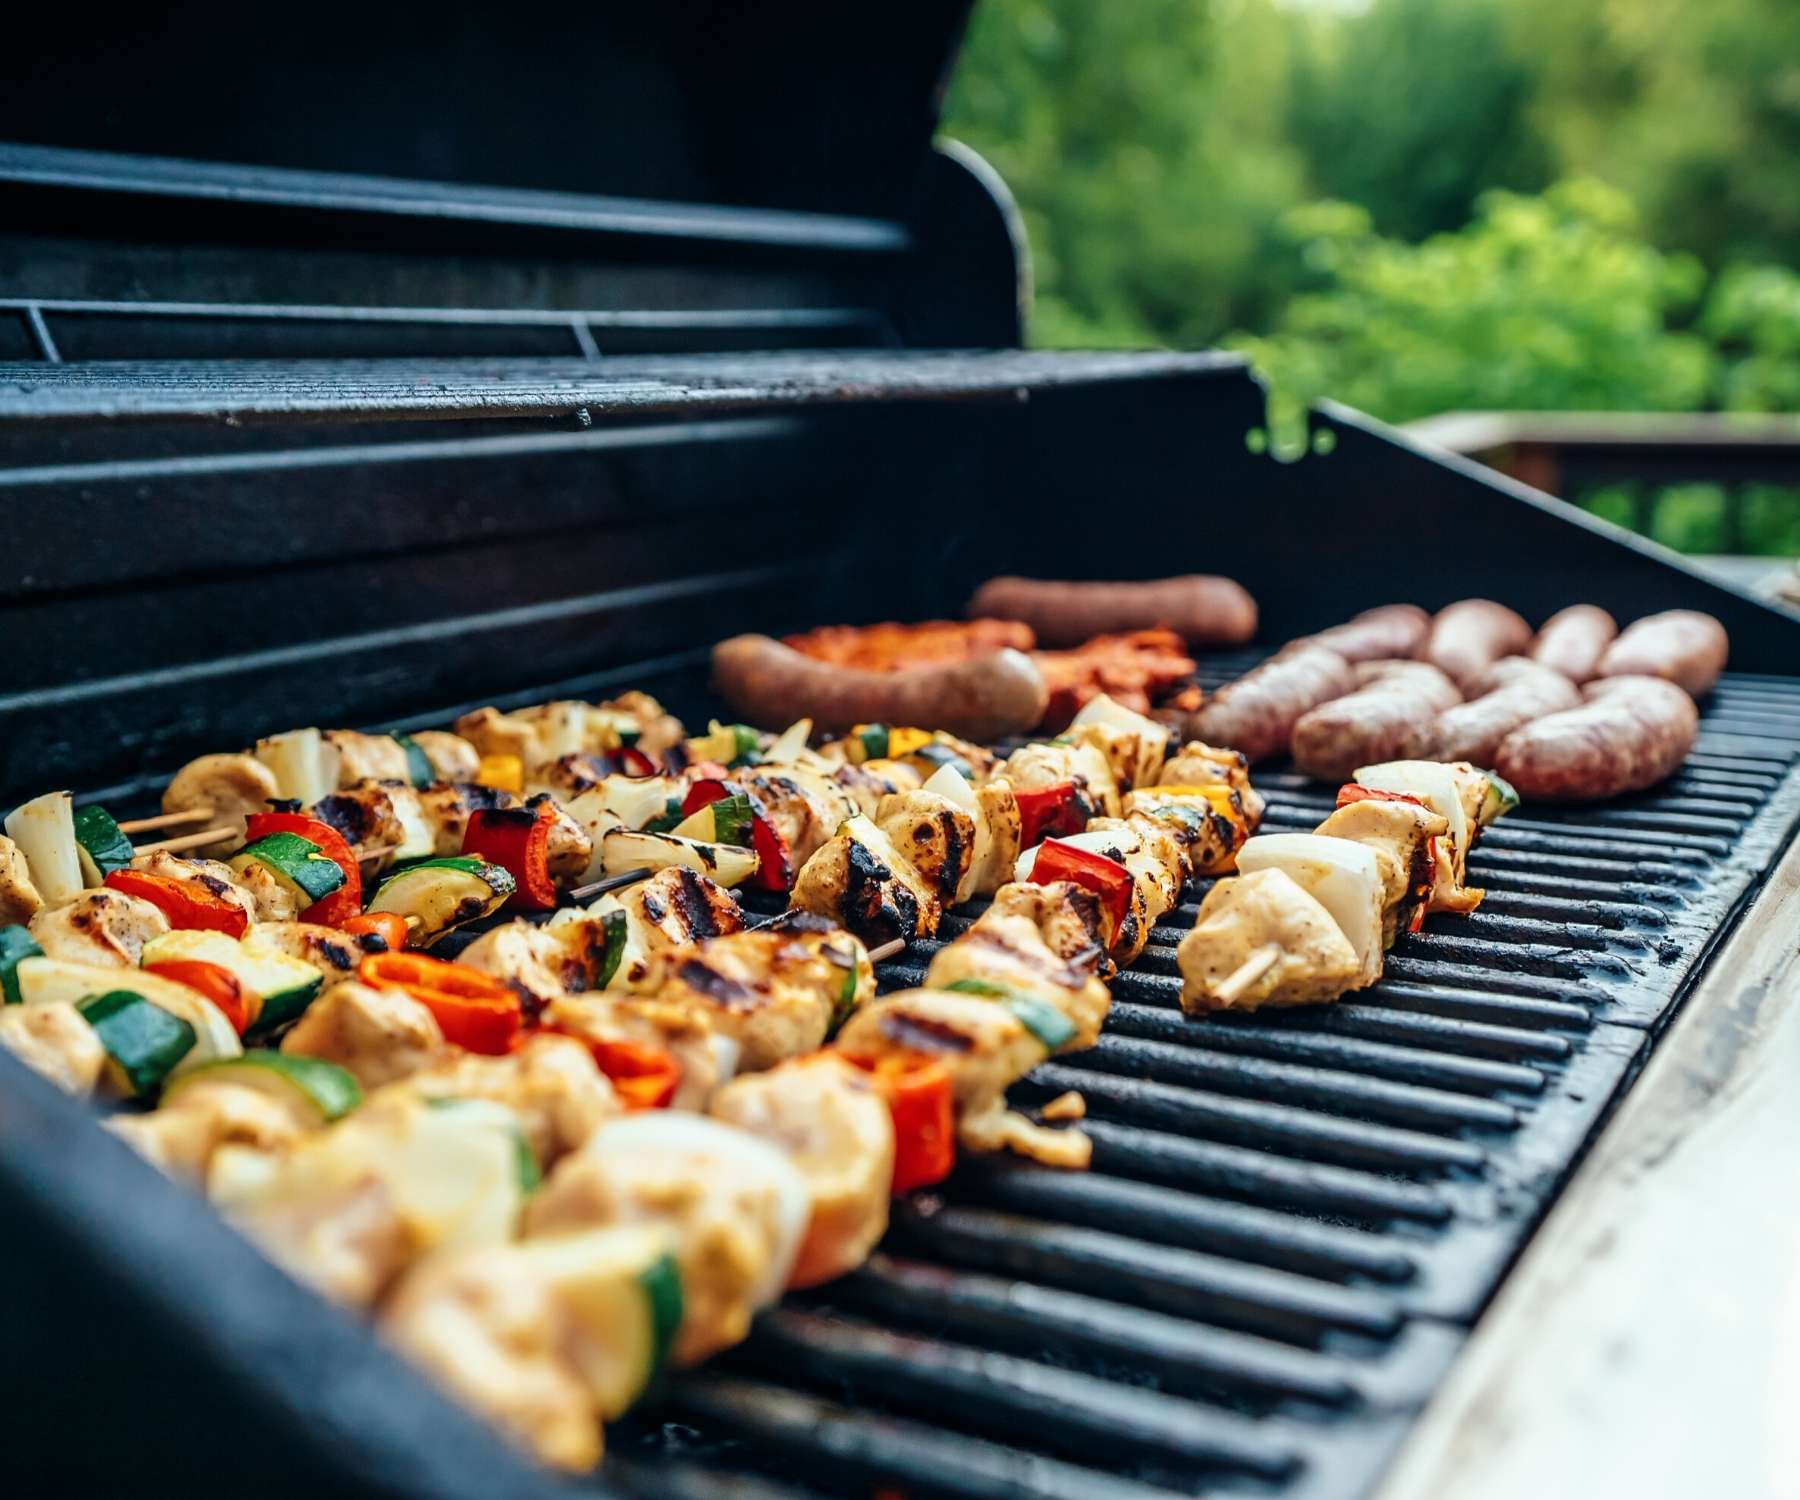 gas barbecue with food on the griddle